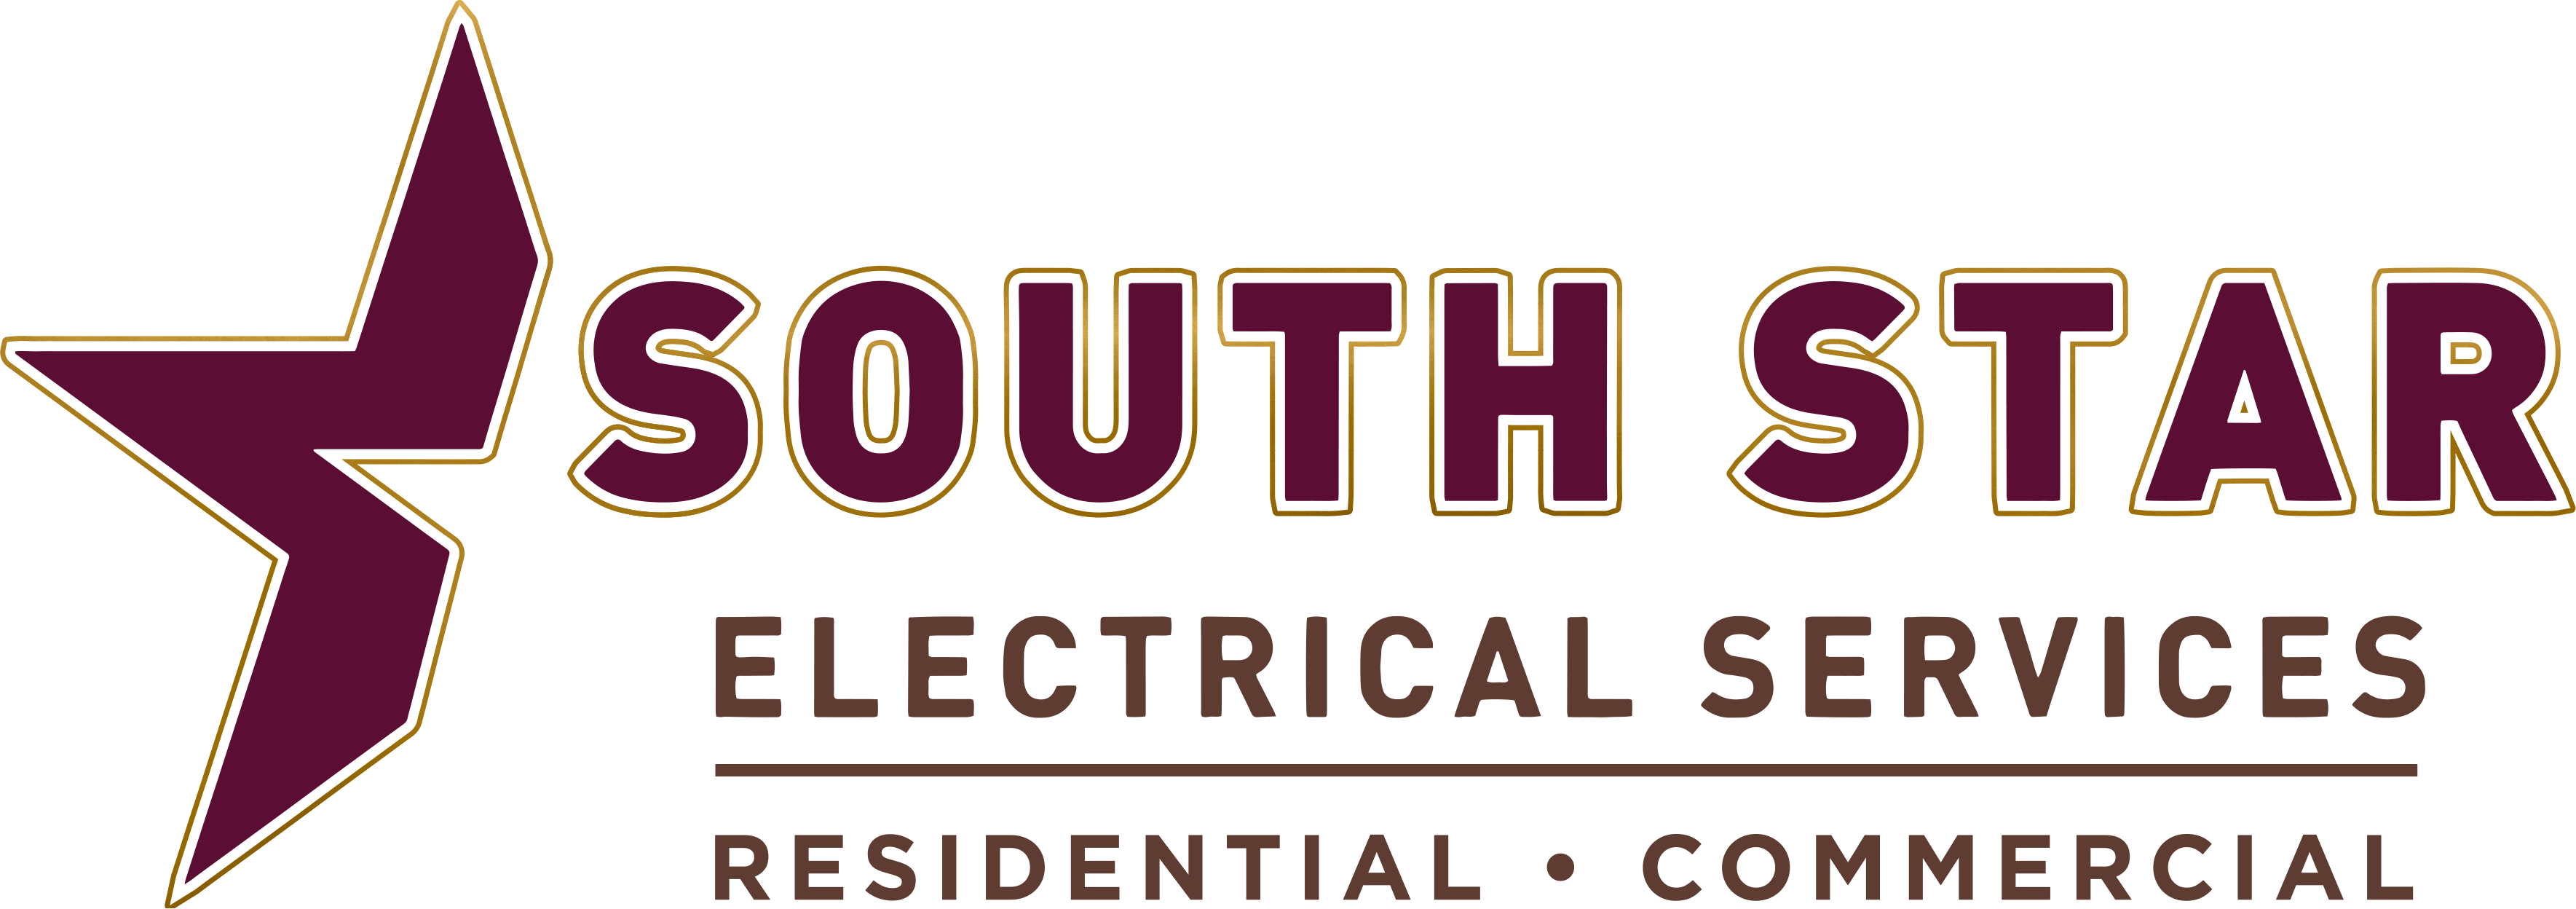 South Star Electrical Services